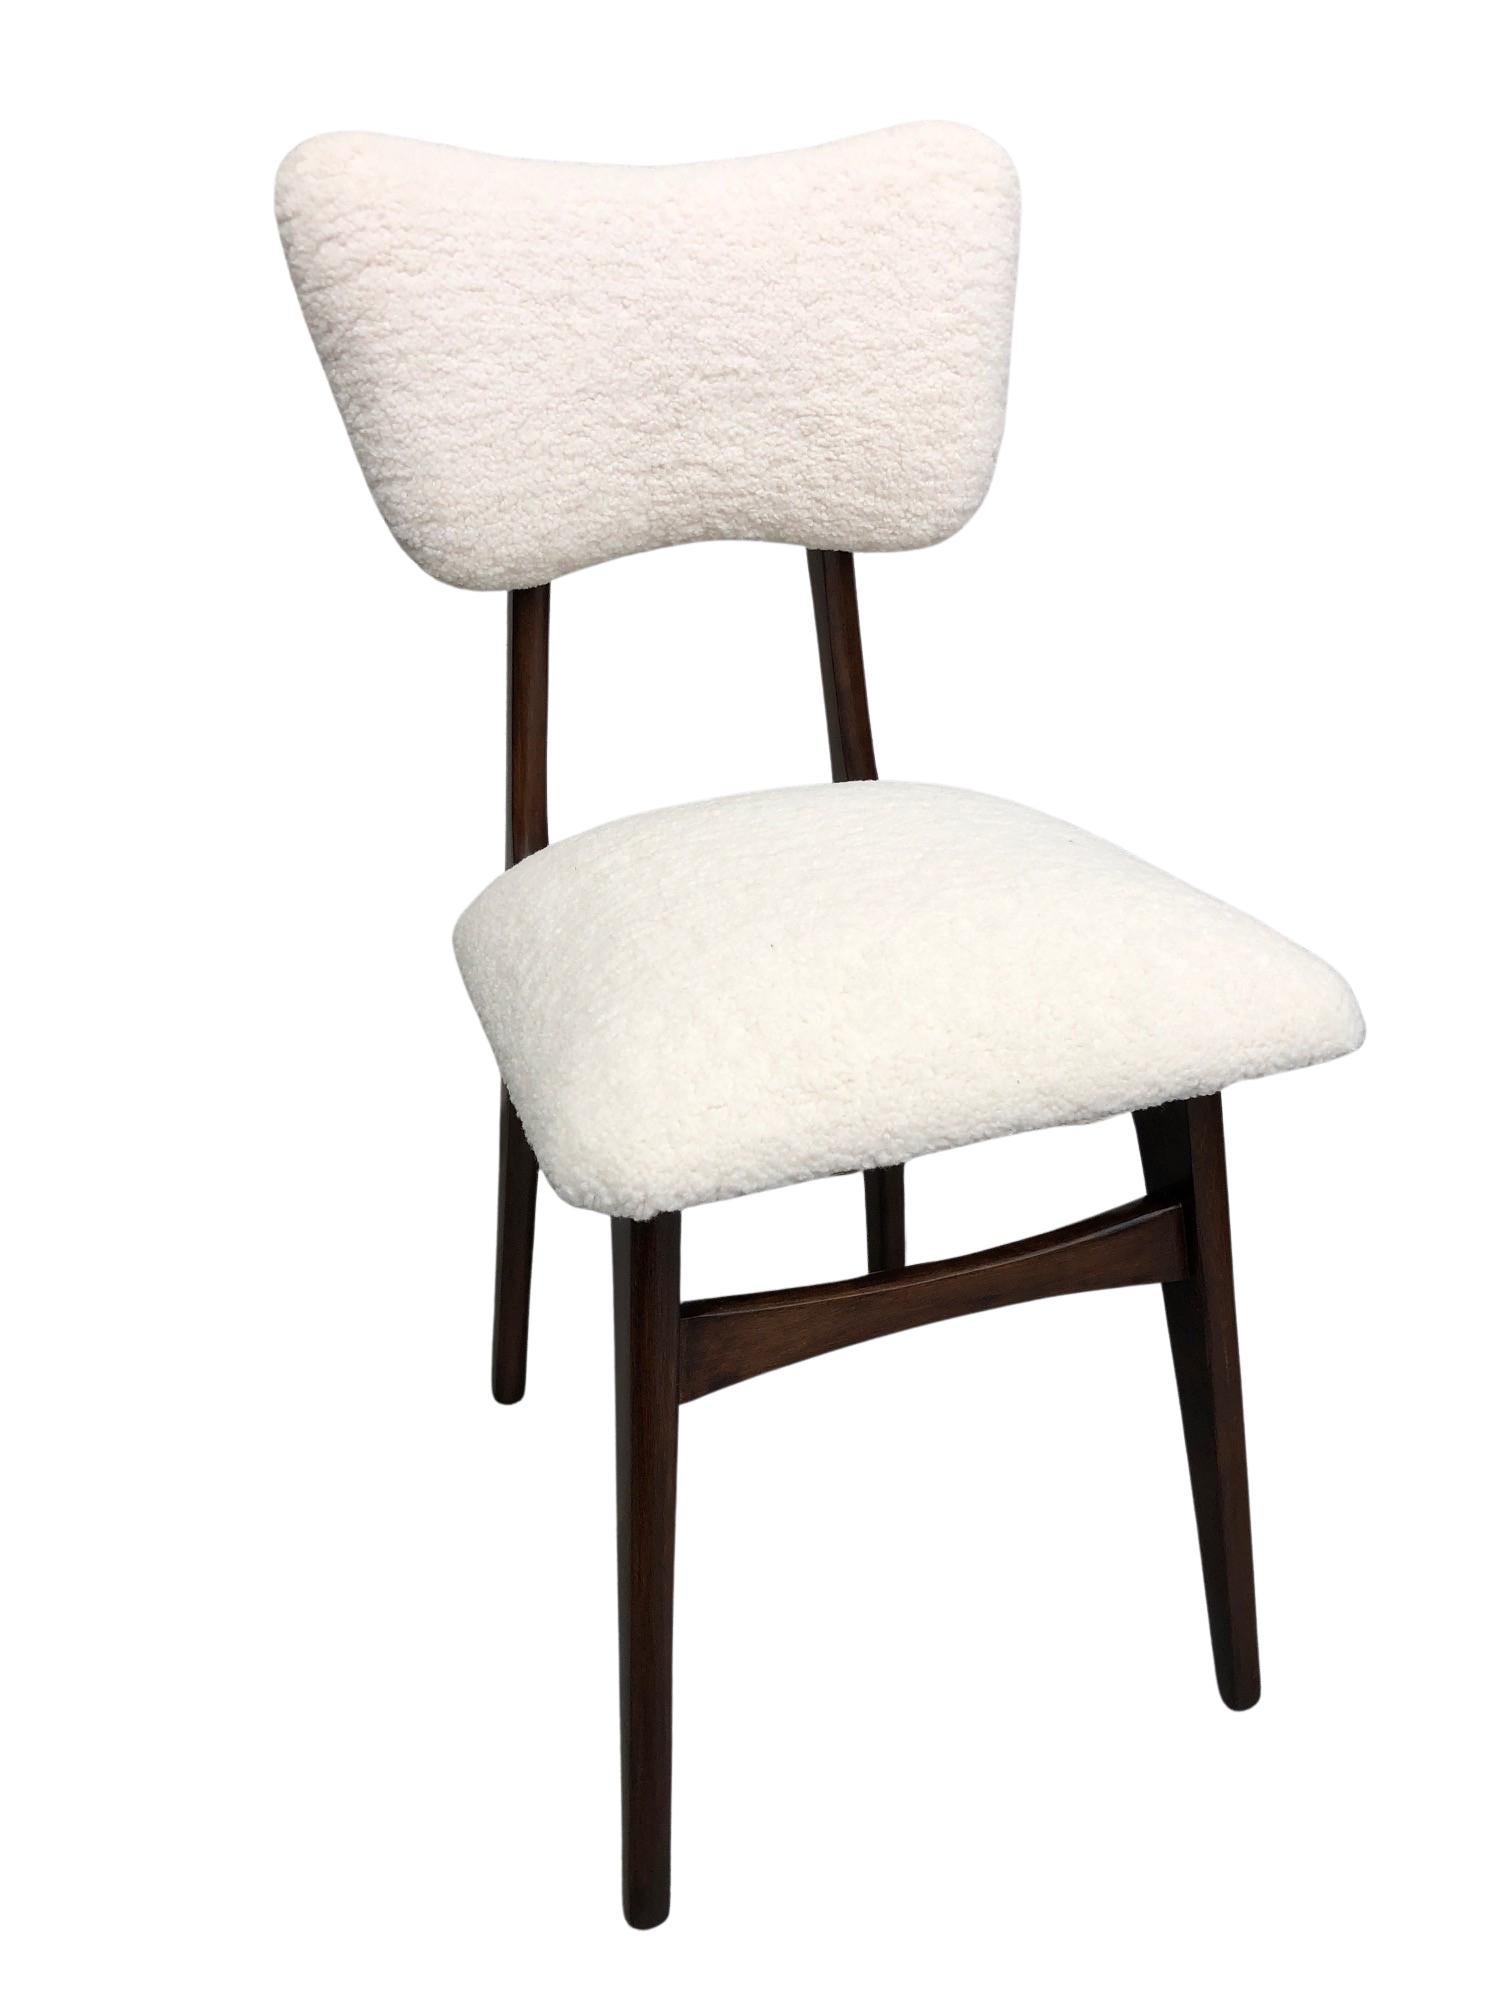 Set of 10 Mid-Century Cream Boucle Butterfly Chairs, Europe, 1960s For Sale 1